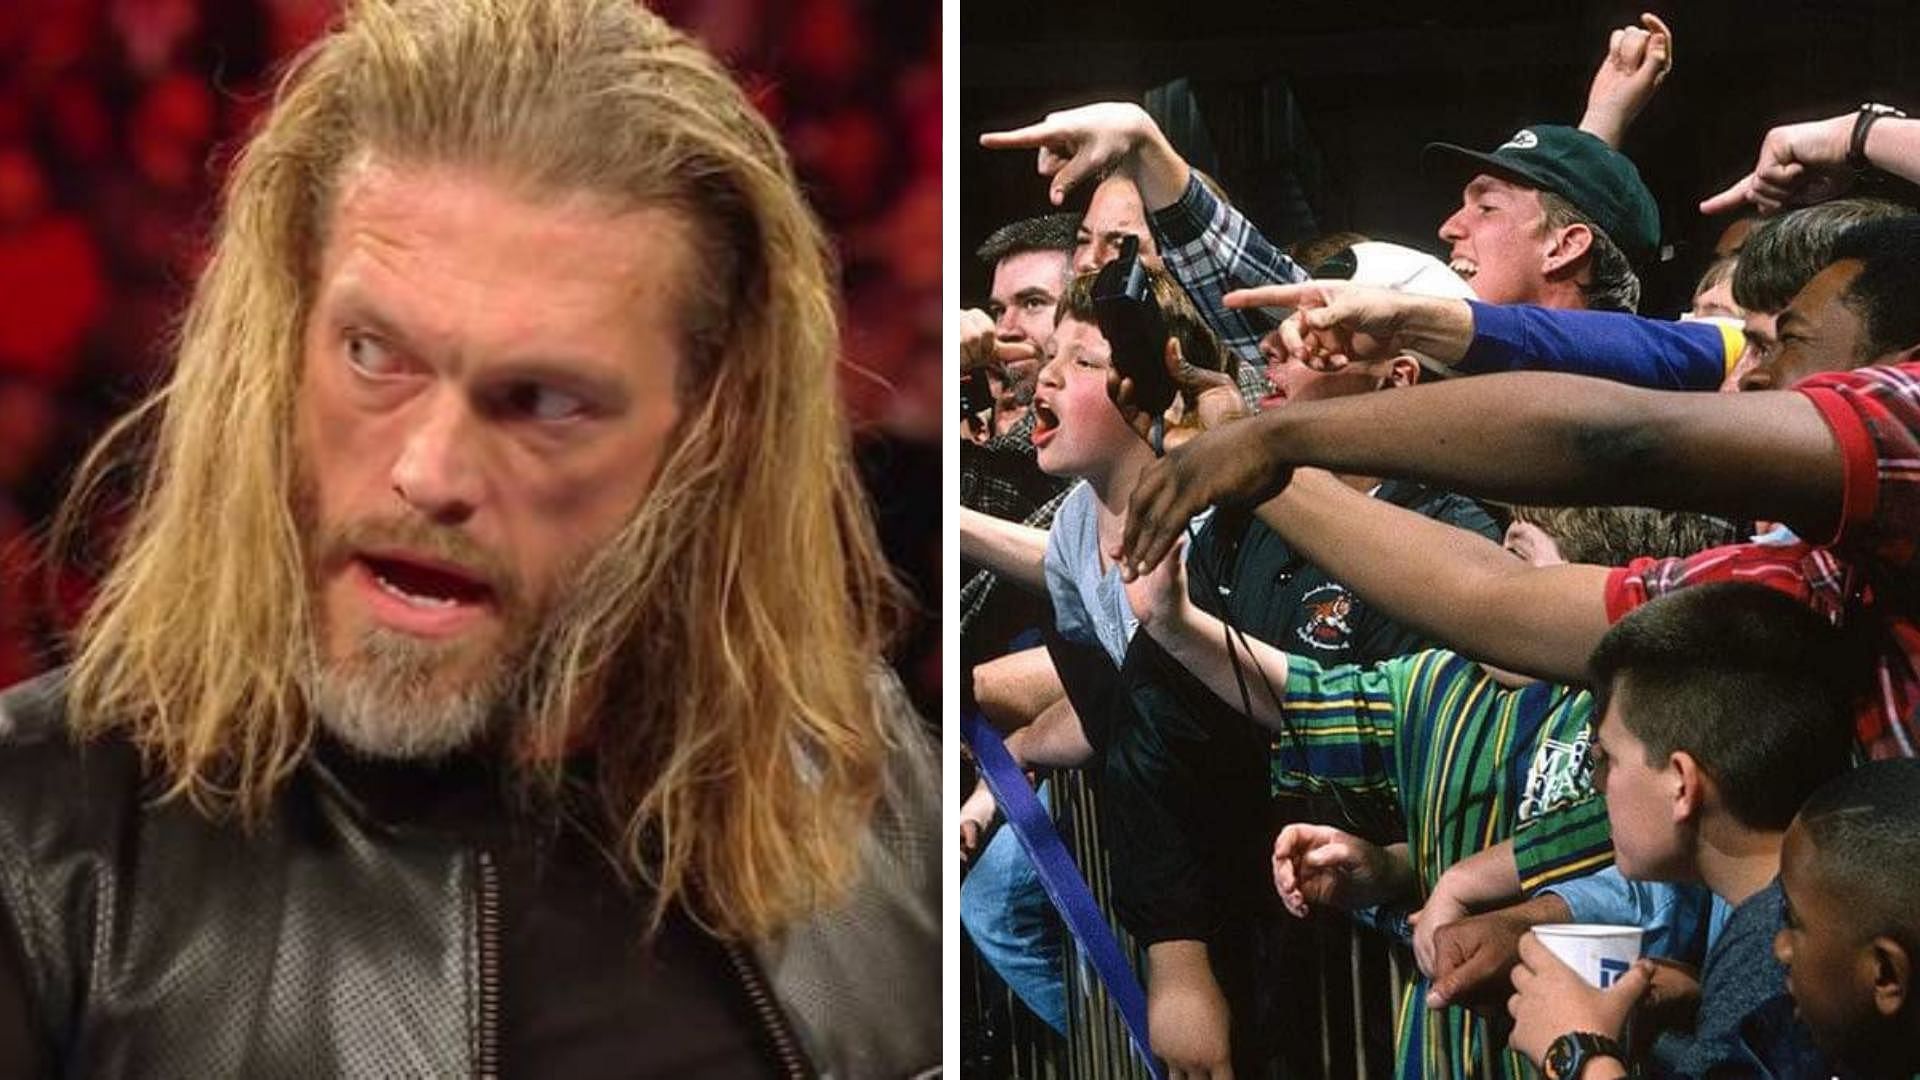 Edge was inducted into the WWE Hall of Fame in 2012